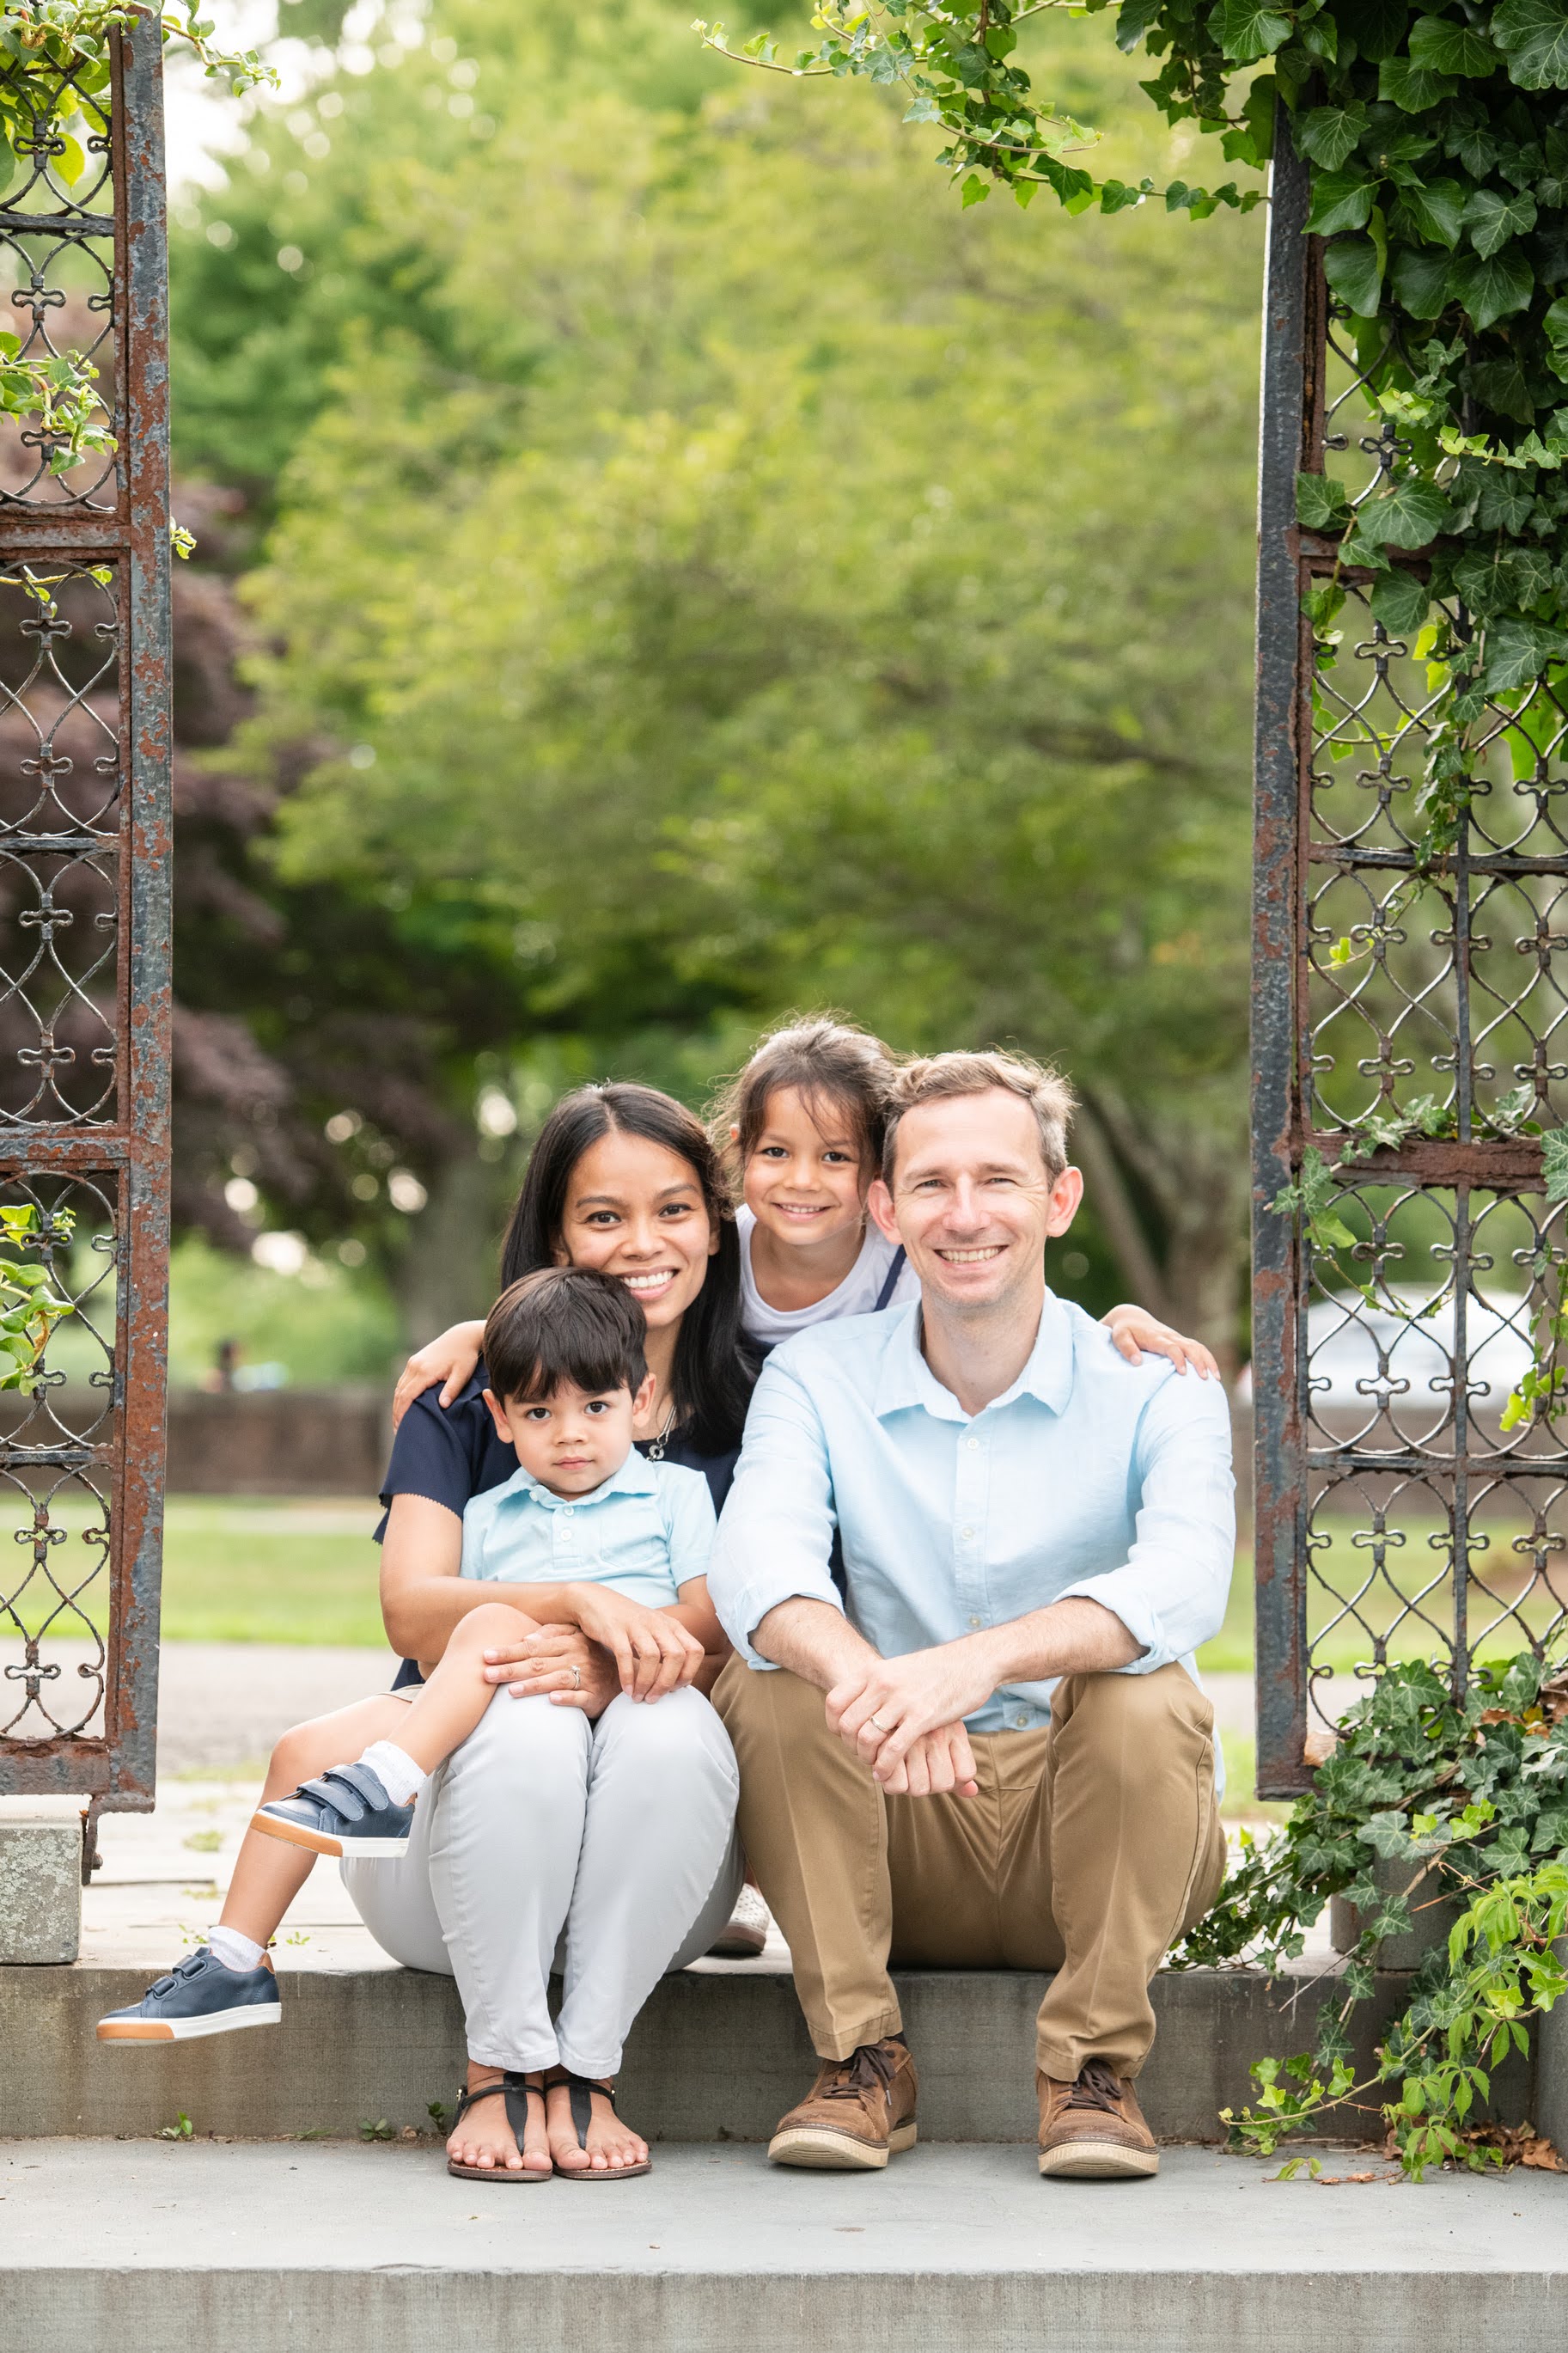 Fairfield County Family Photo Shoot | Photo by Erica Carryl - Vine & Branch Photography | Taste As You Go